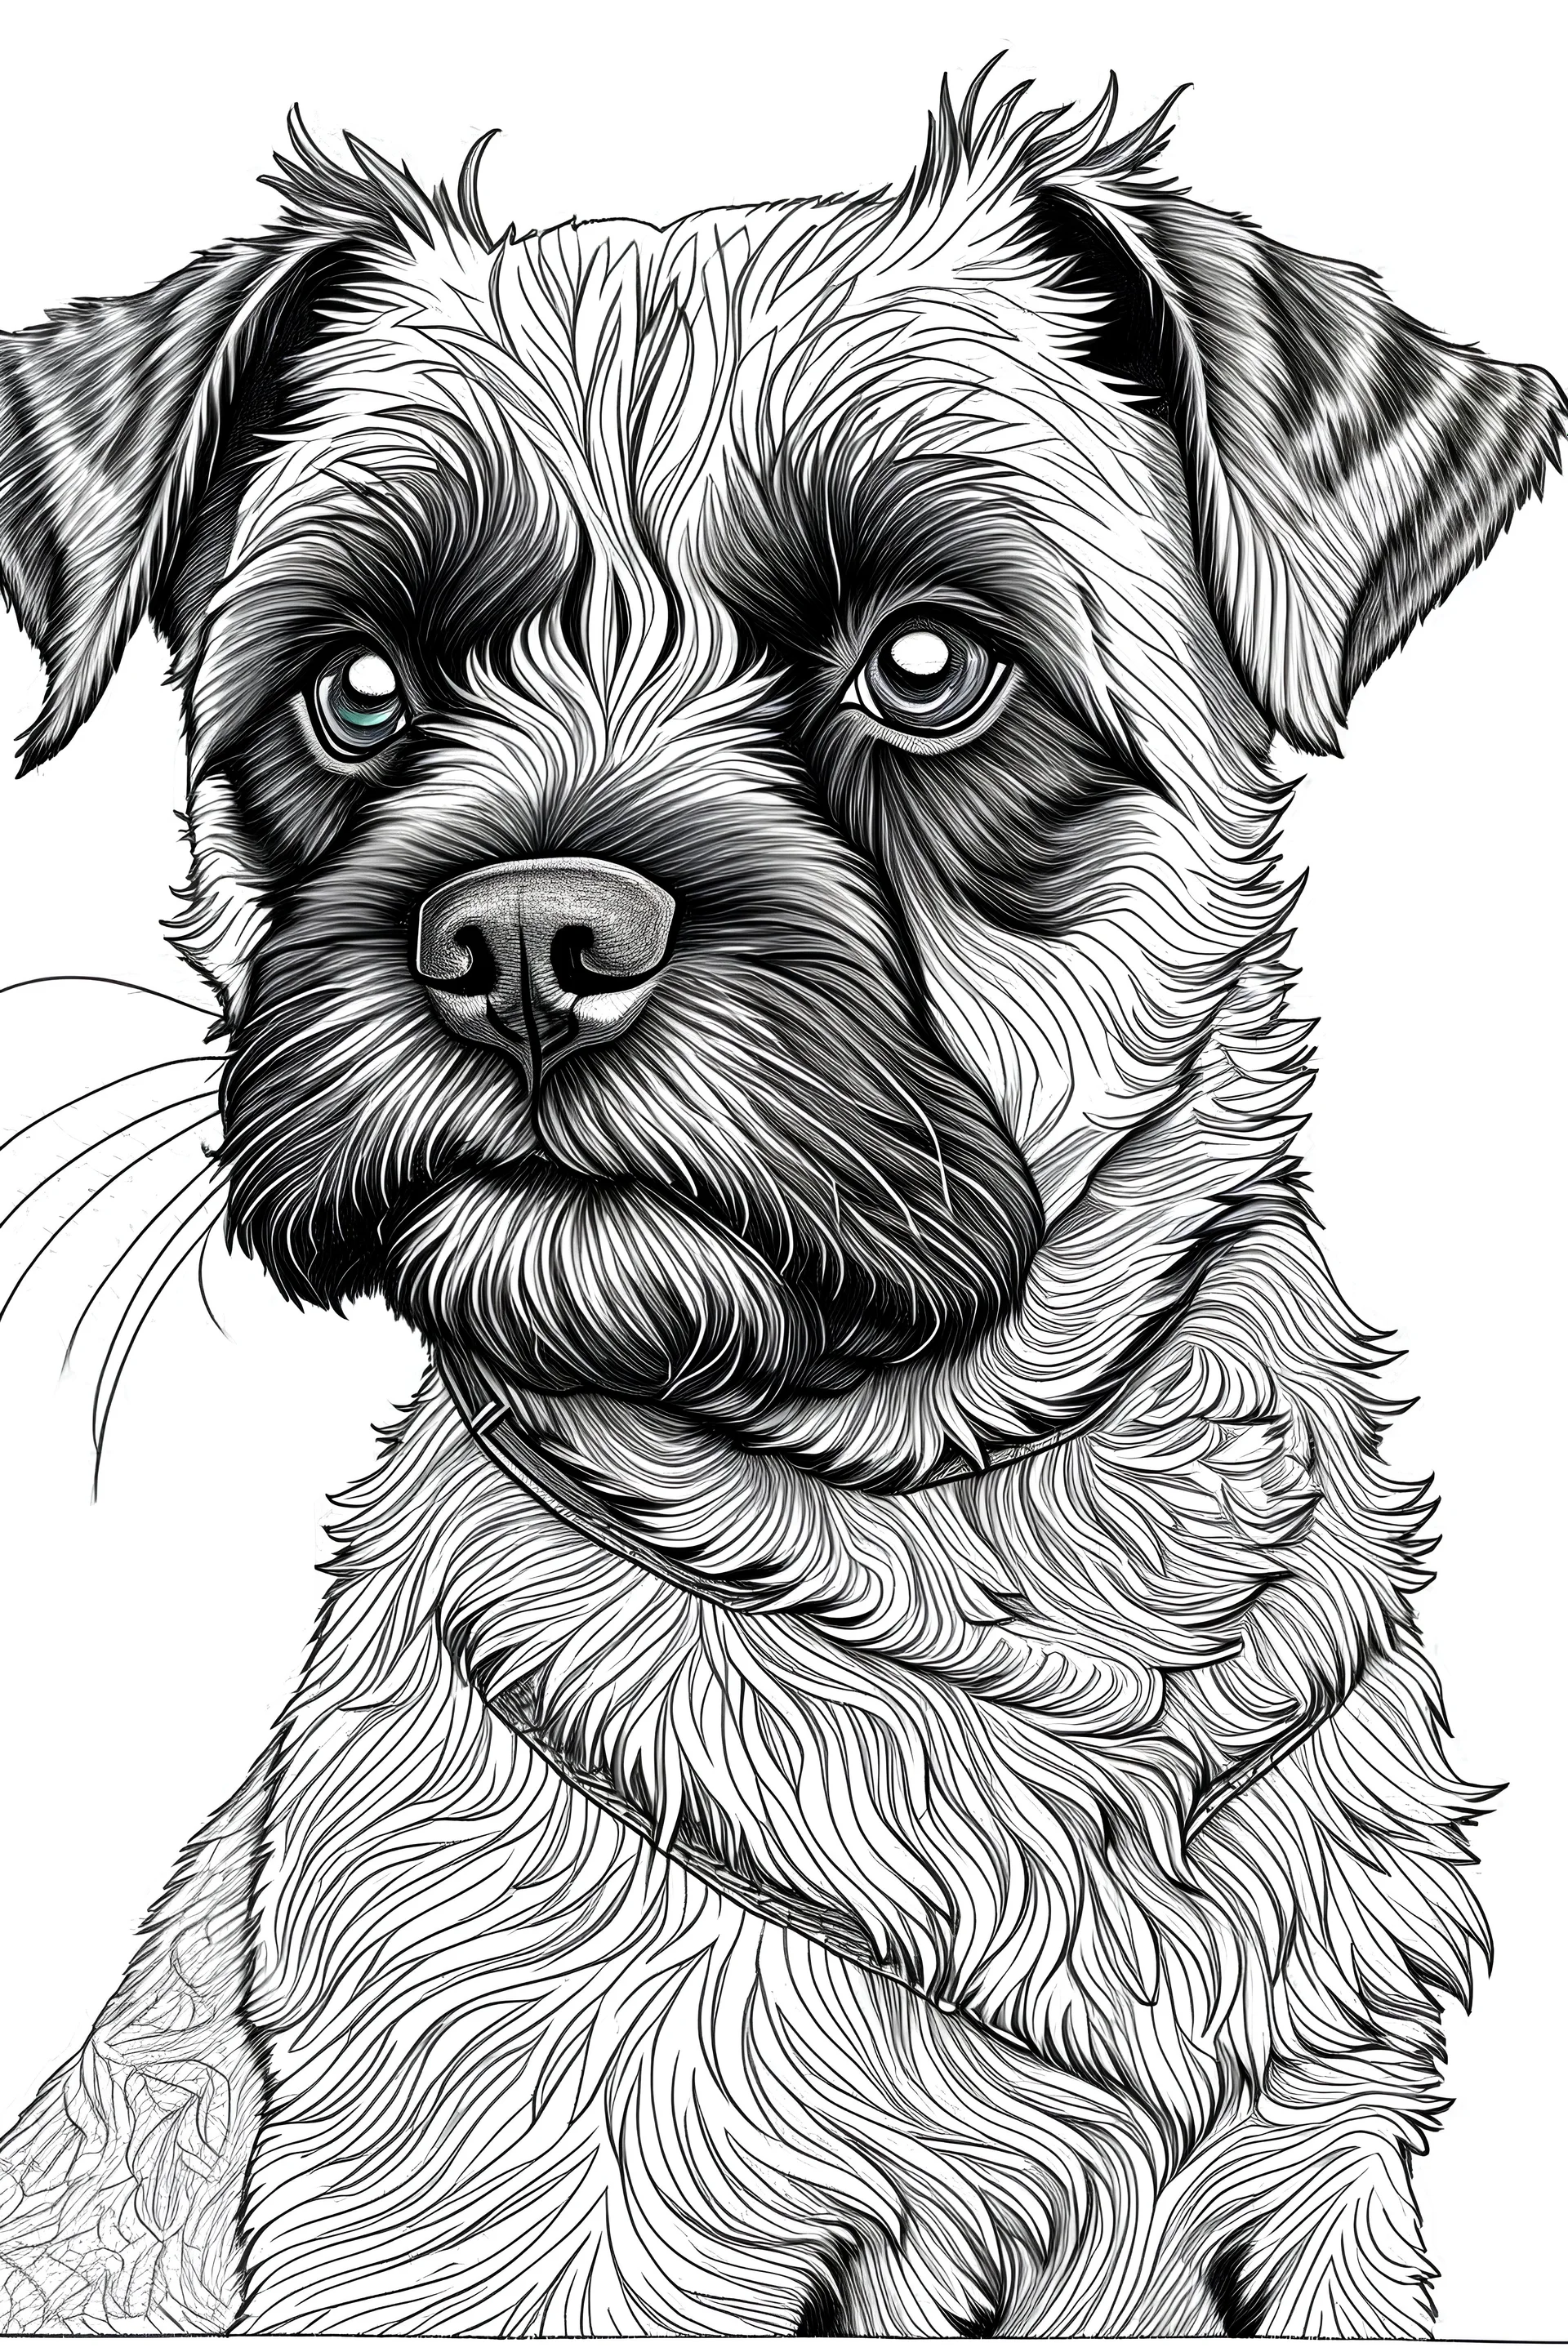 line drawing of a border terrier